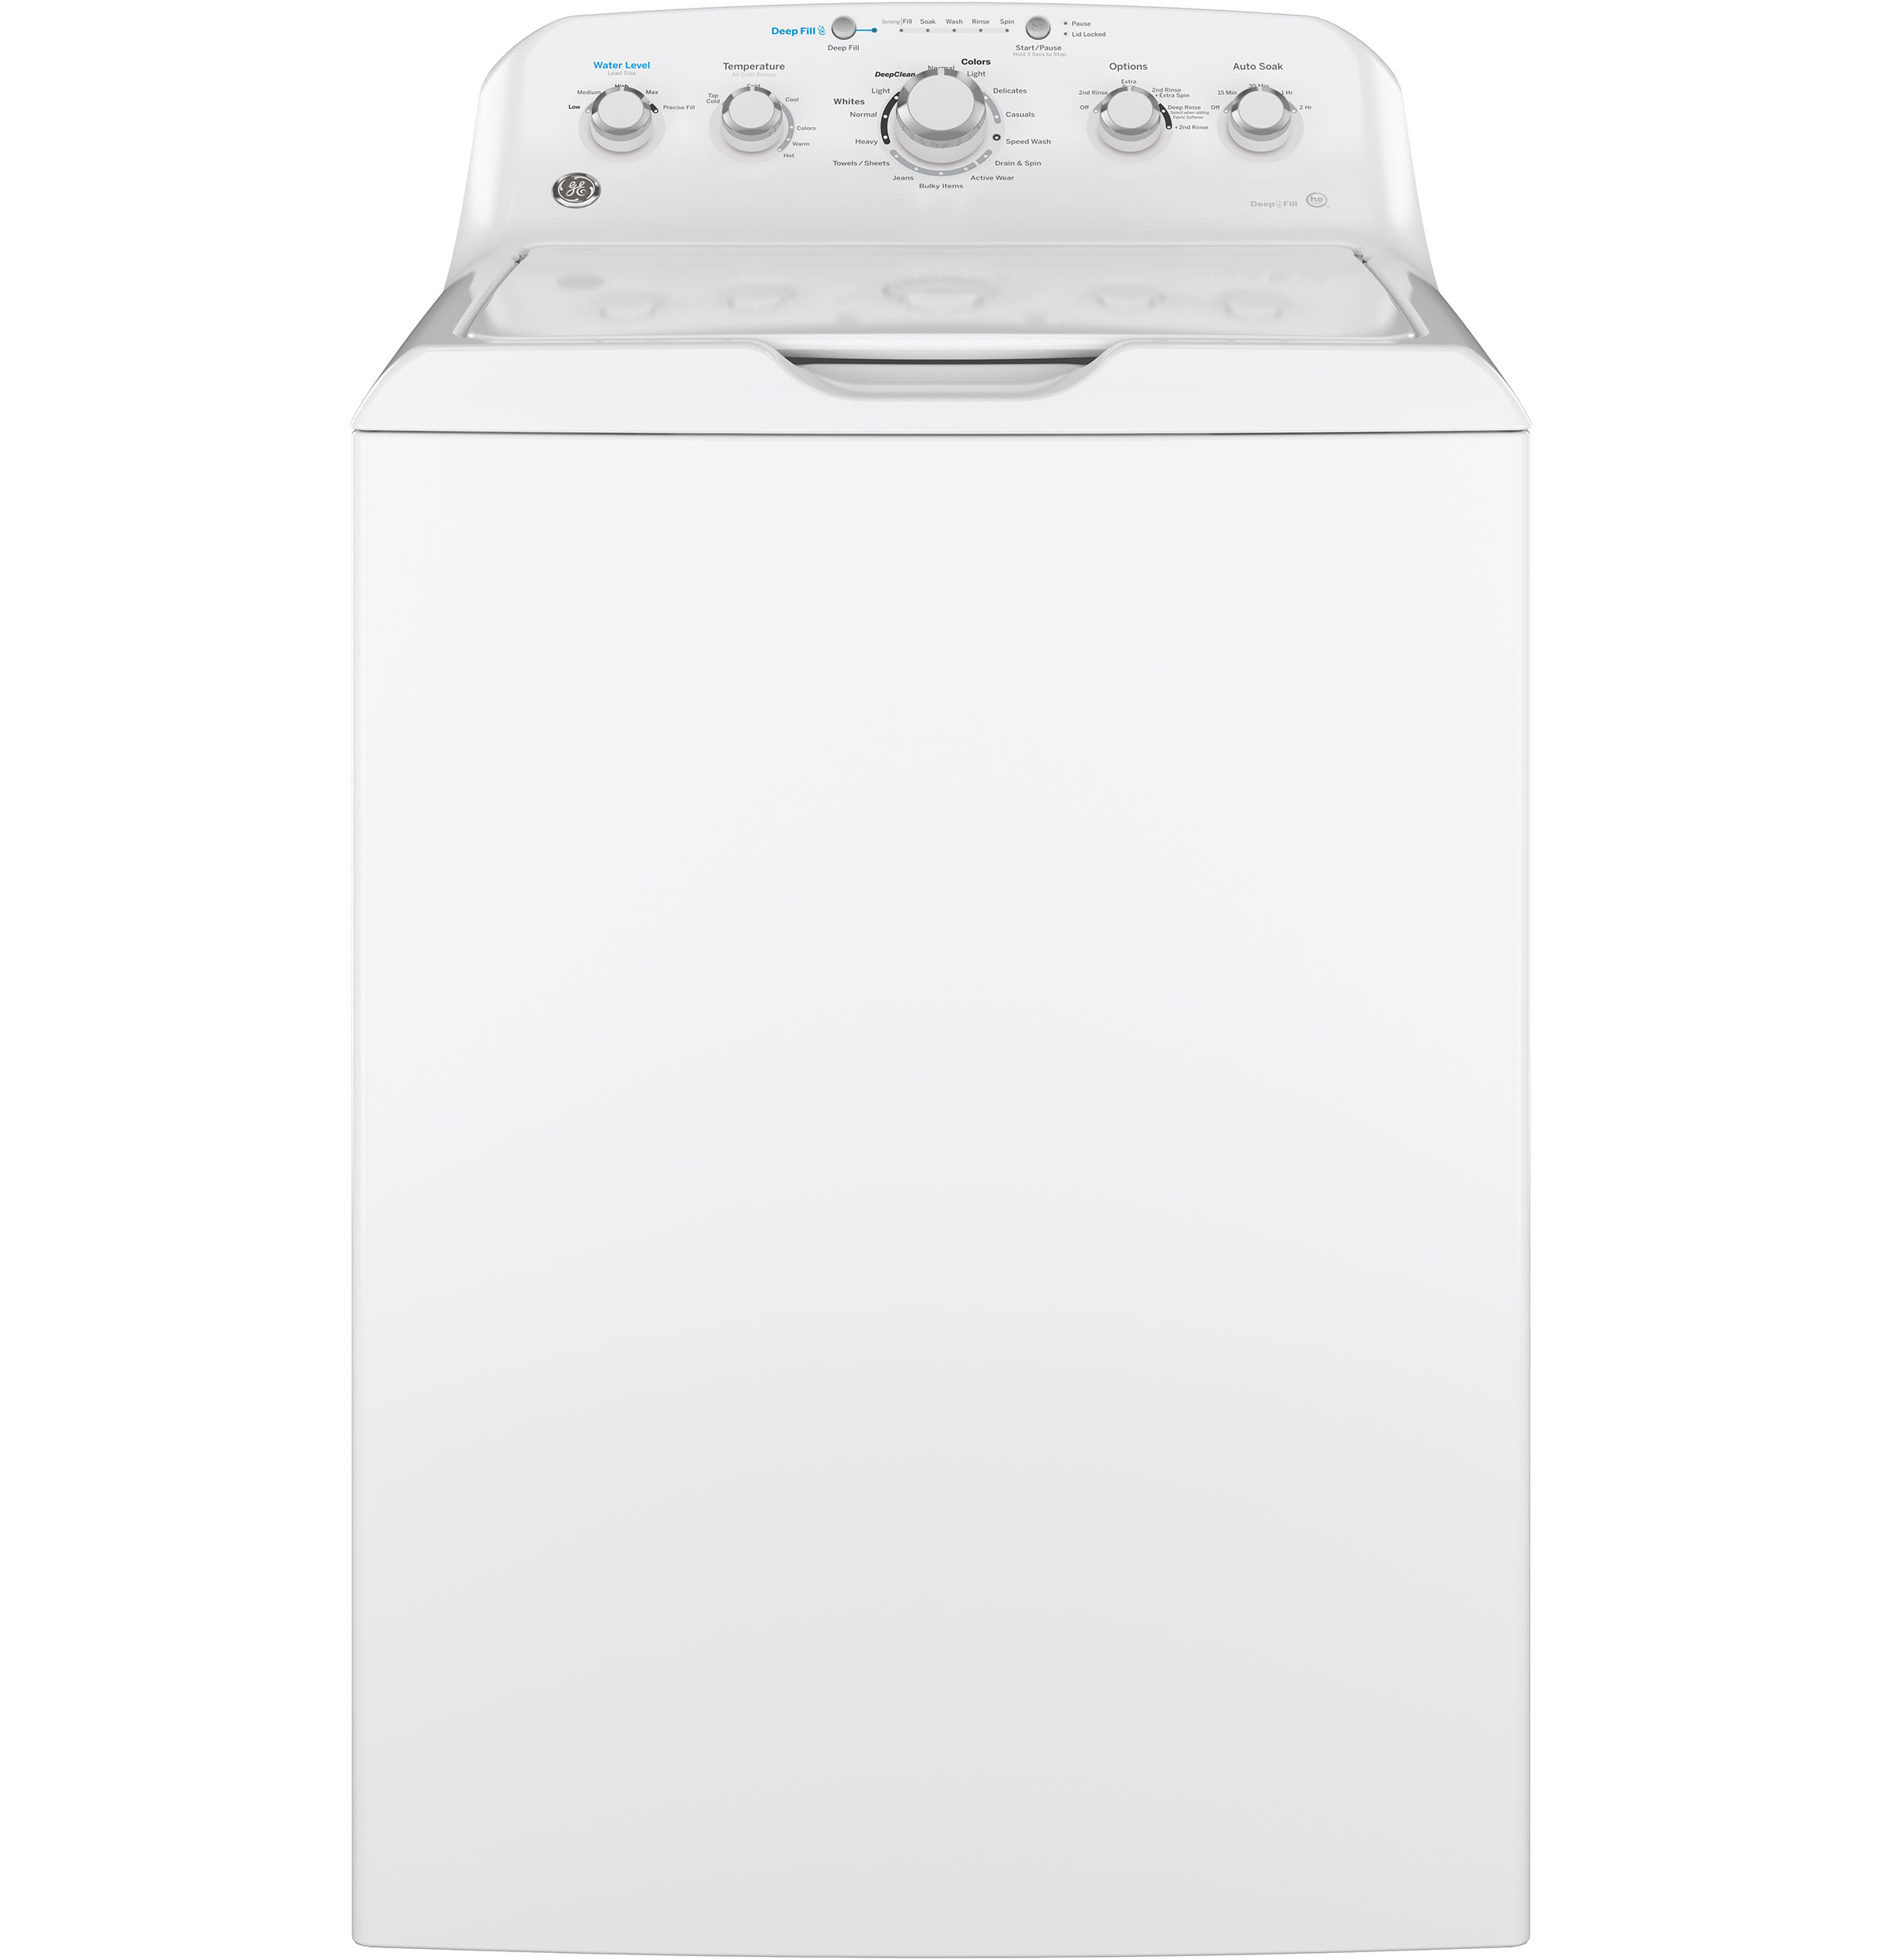 white front load wash with knob controls